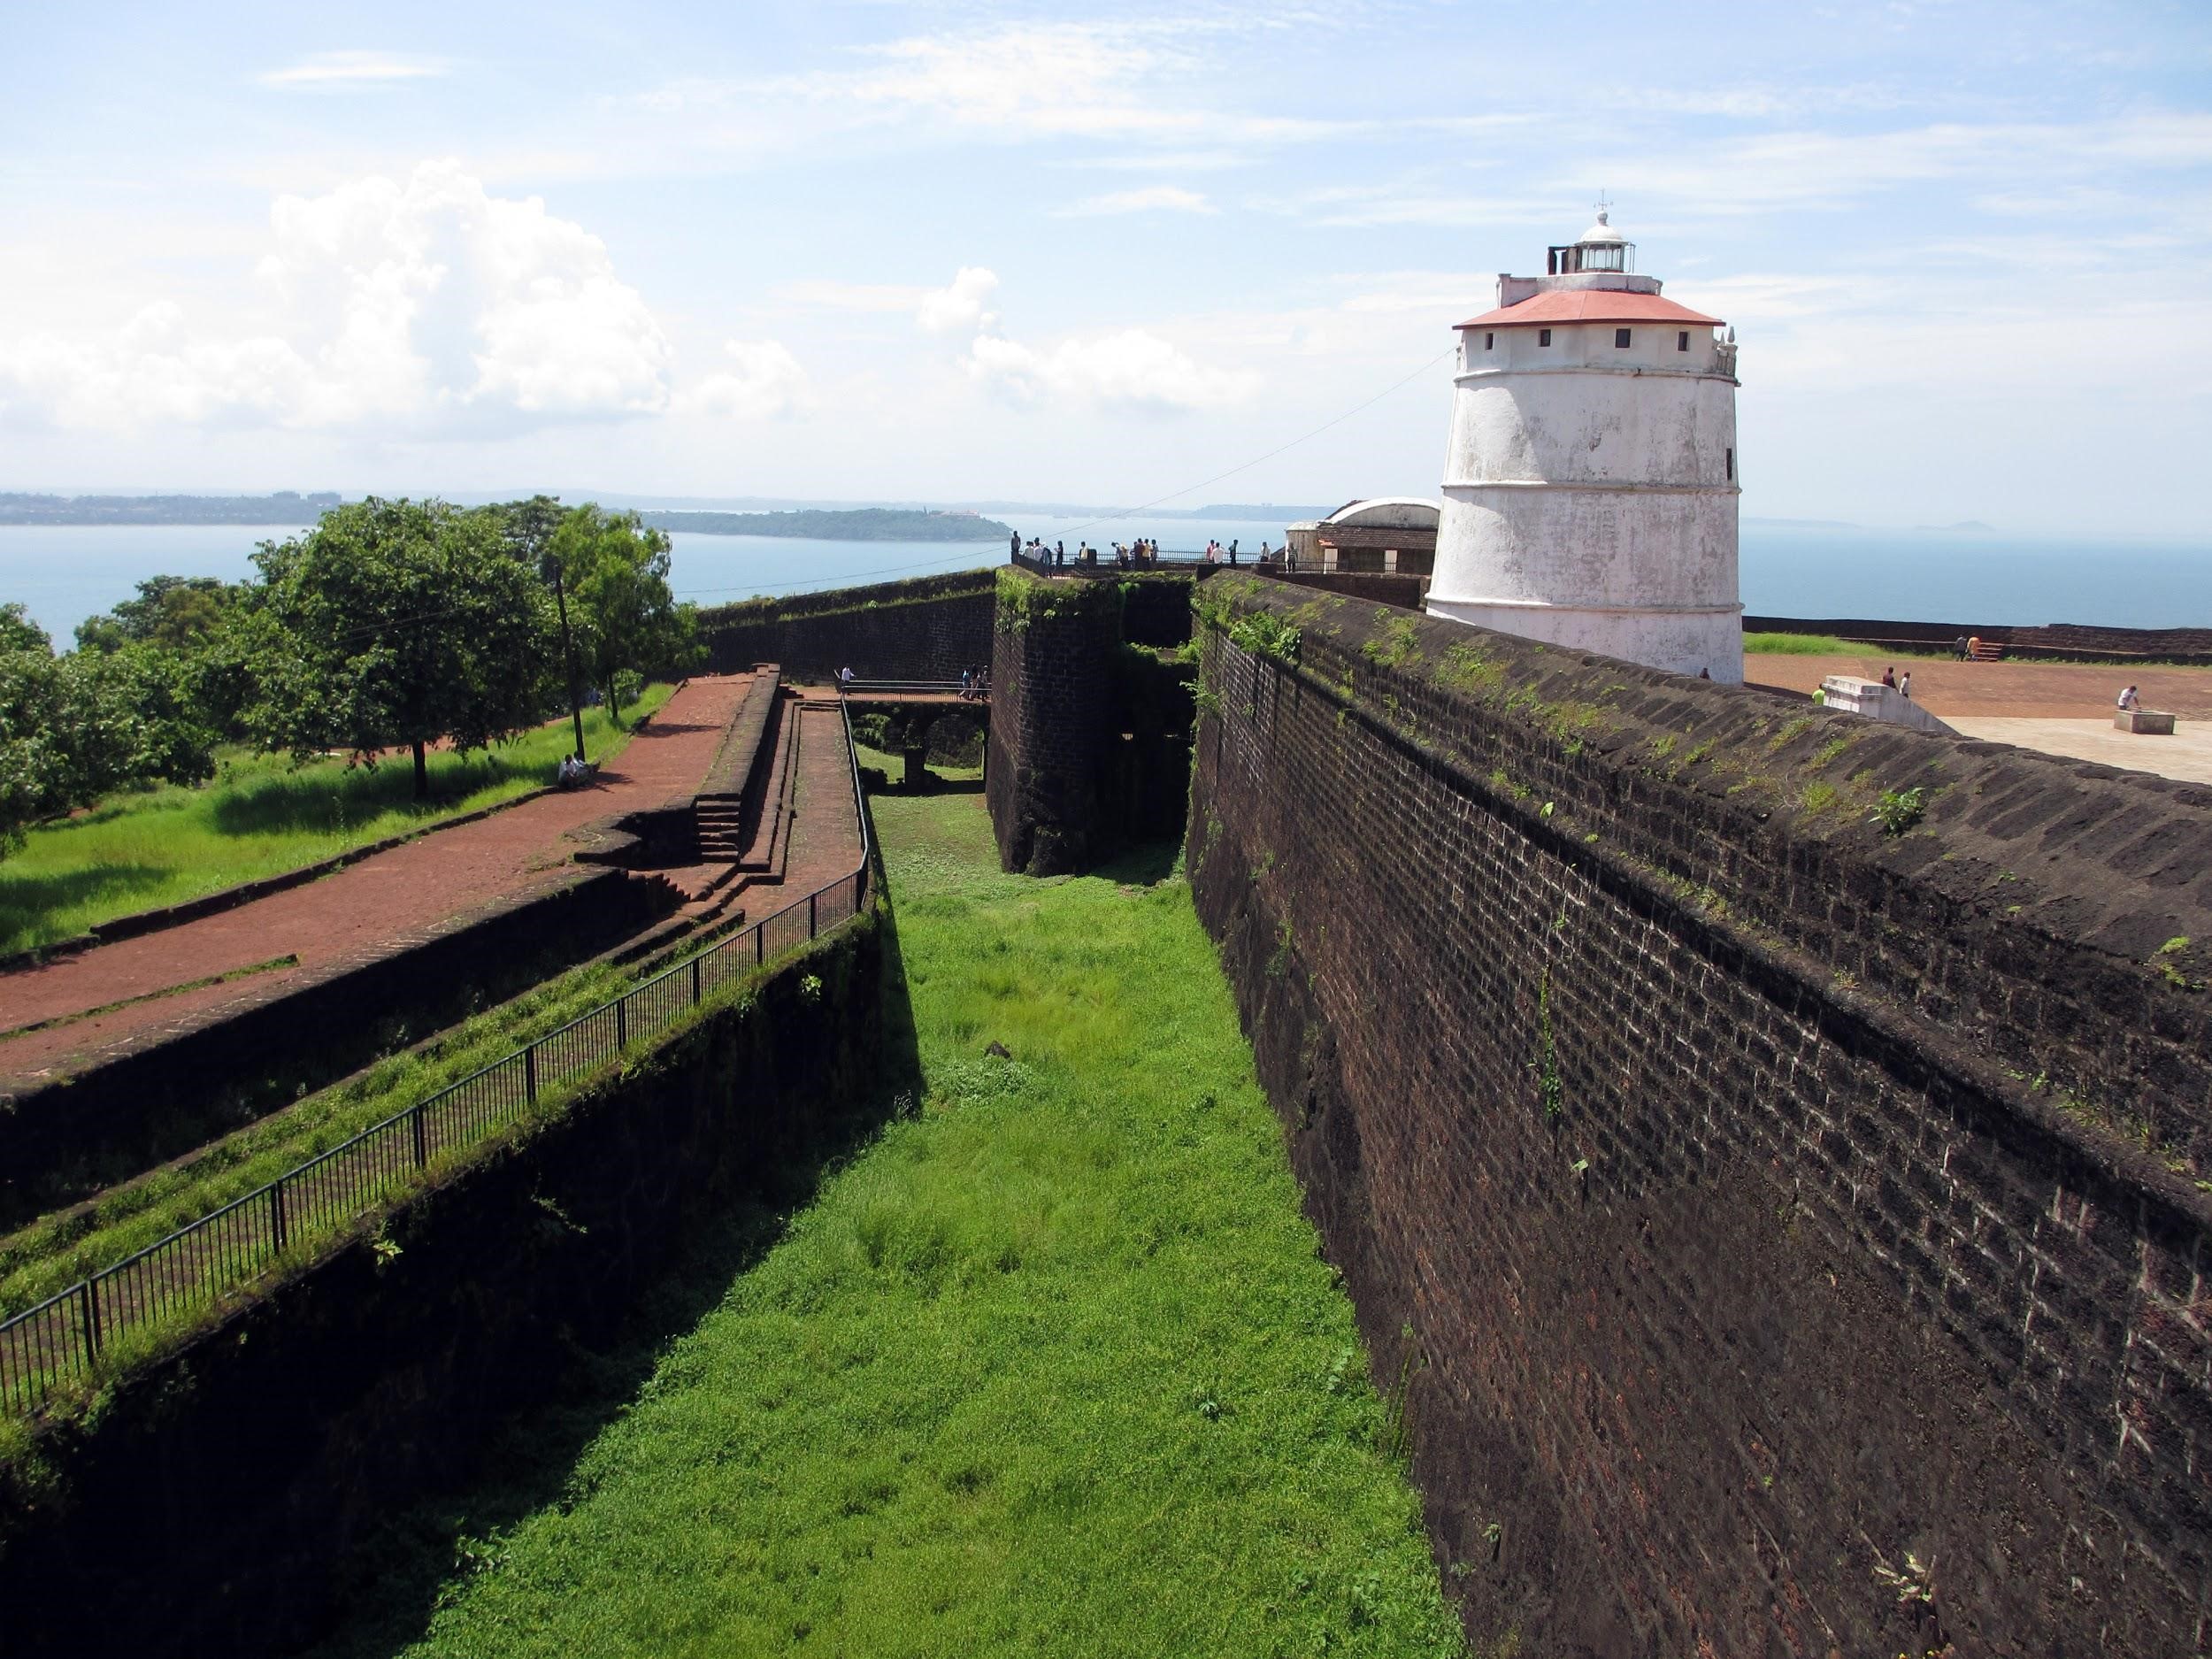 Fort Aguada, Upper Citadel; Image Source: Archaeological Survey of India